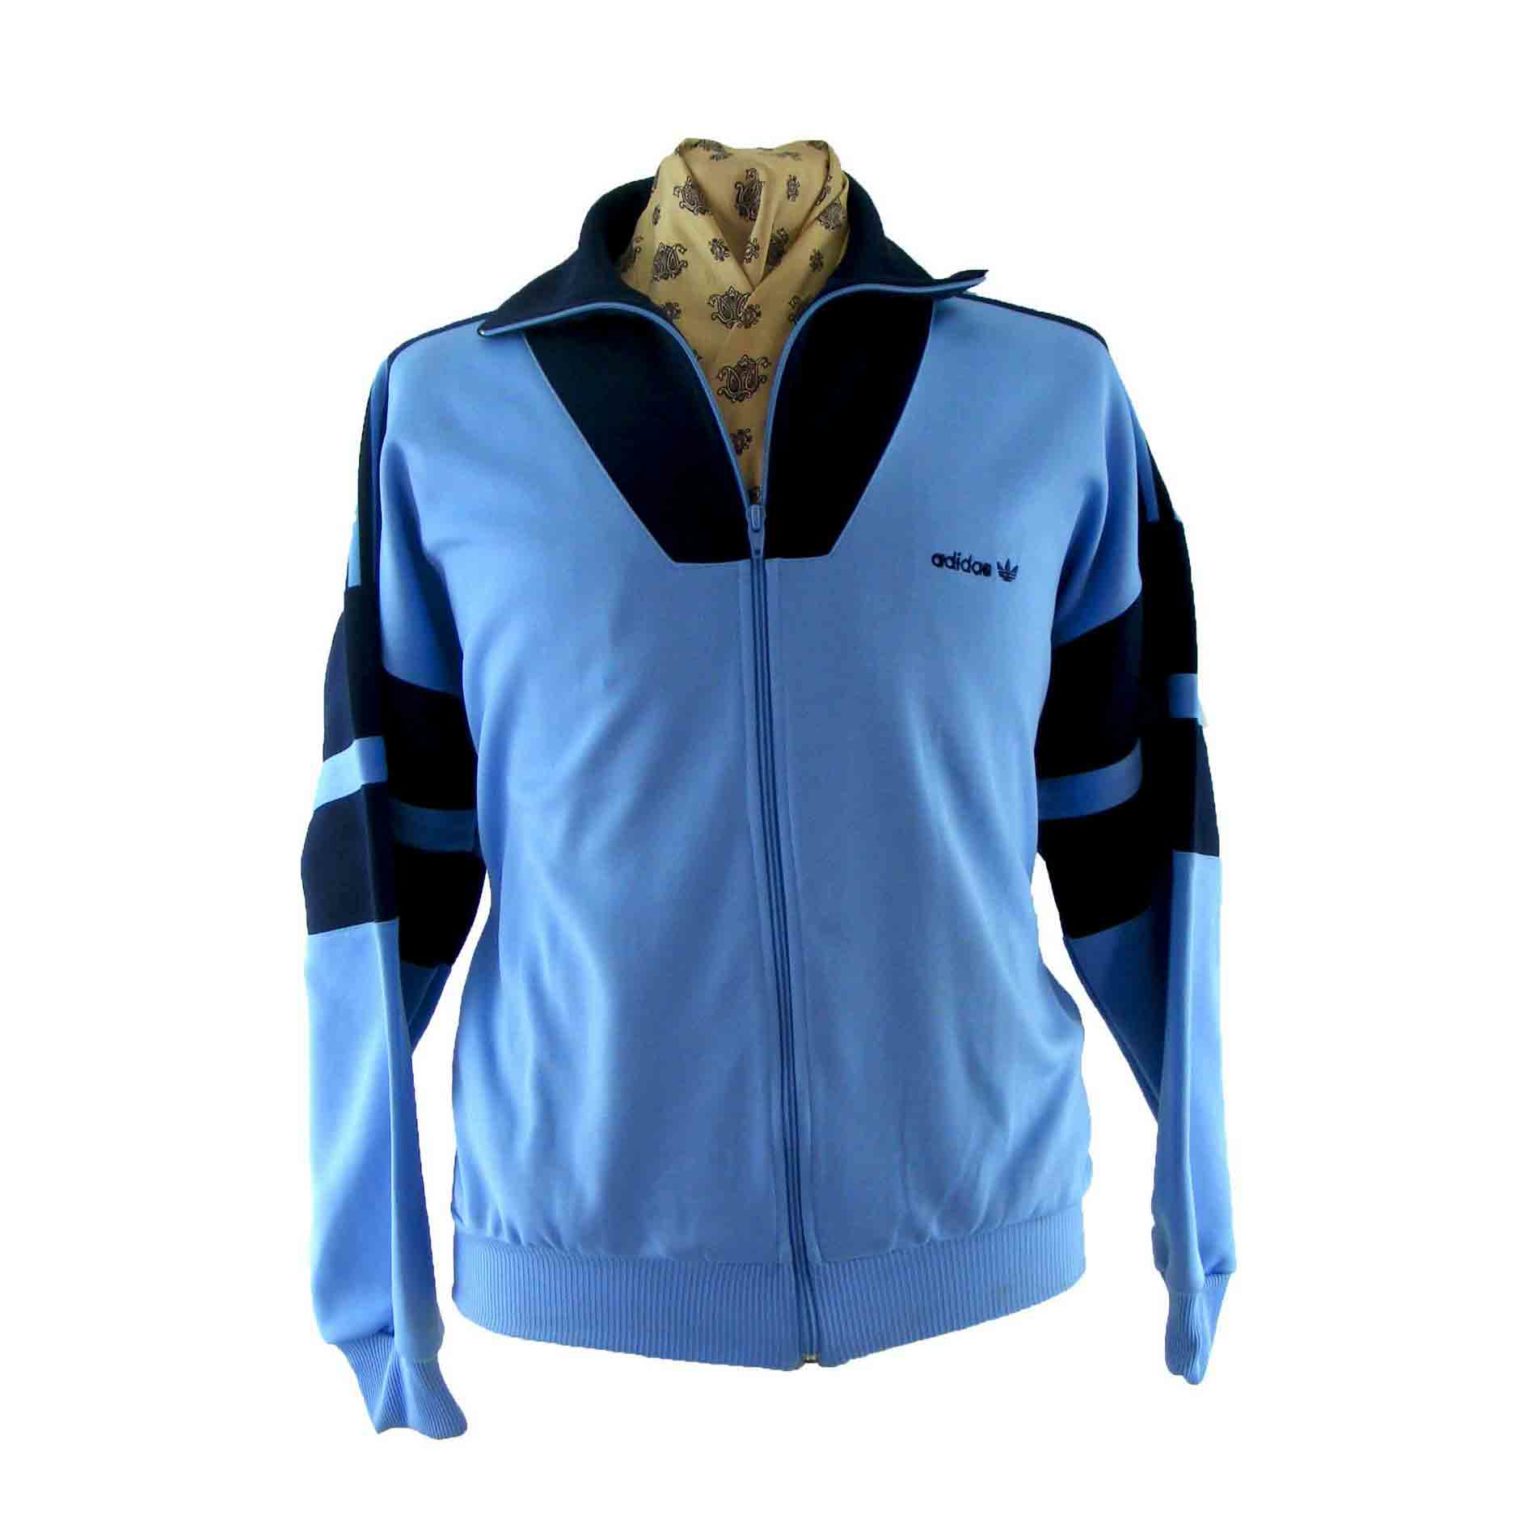 80s Adidas Track Top - Blue 17 Vintage Clothing